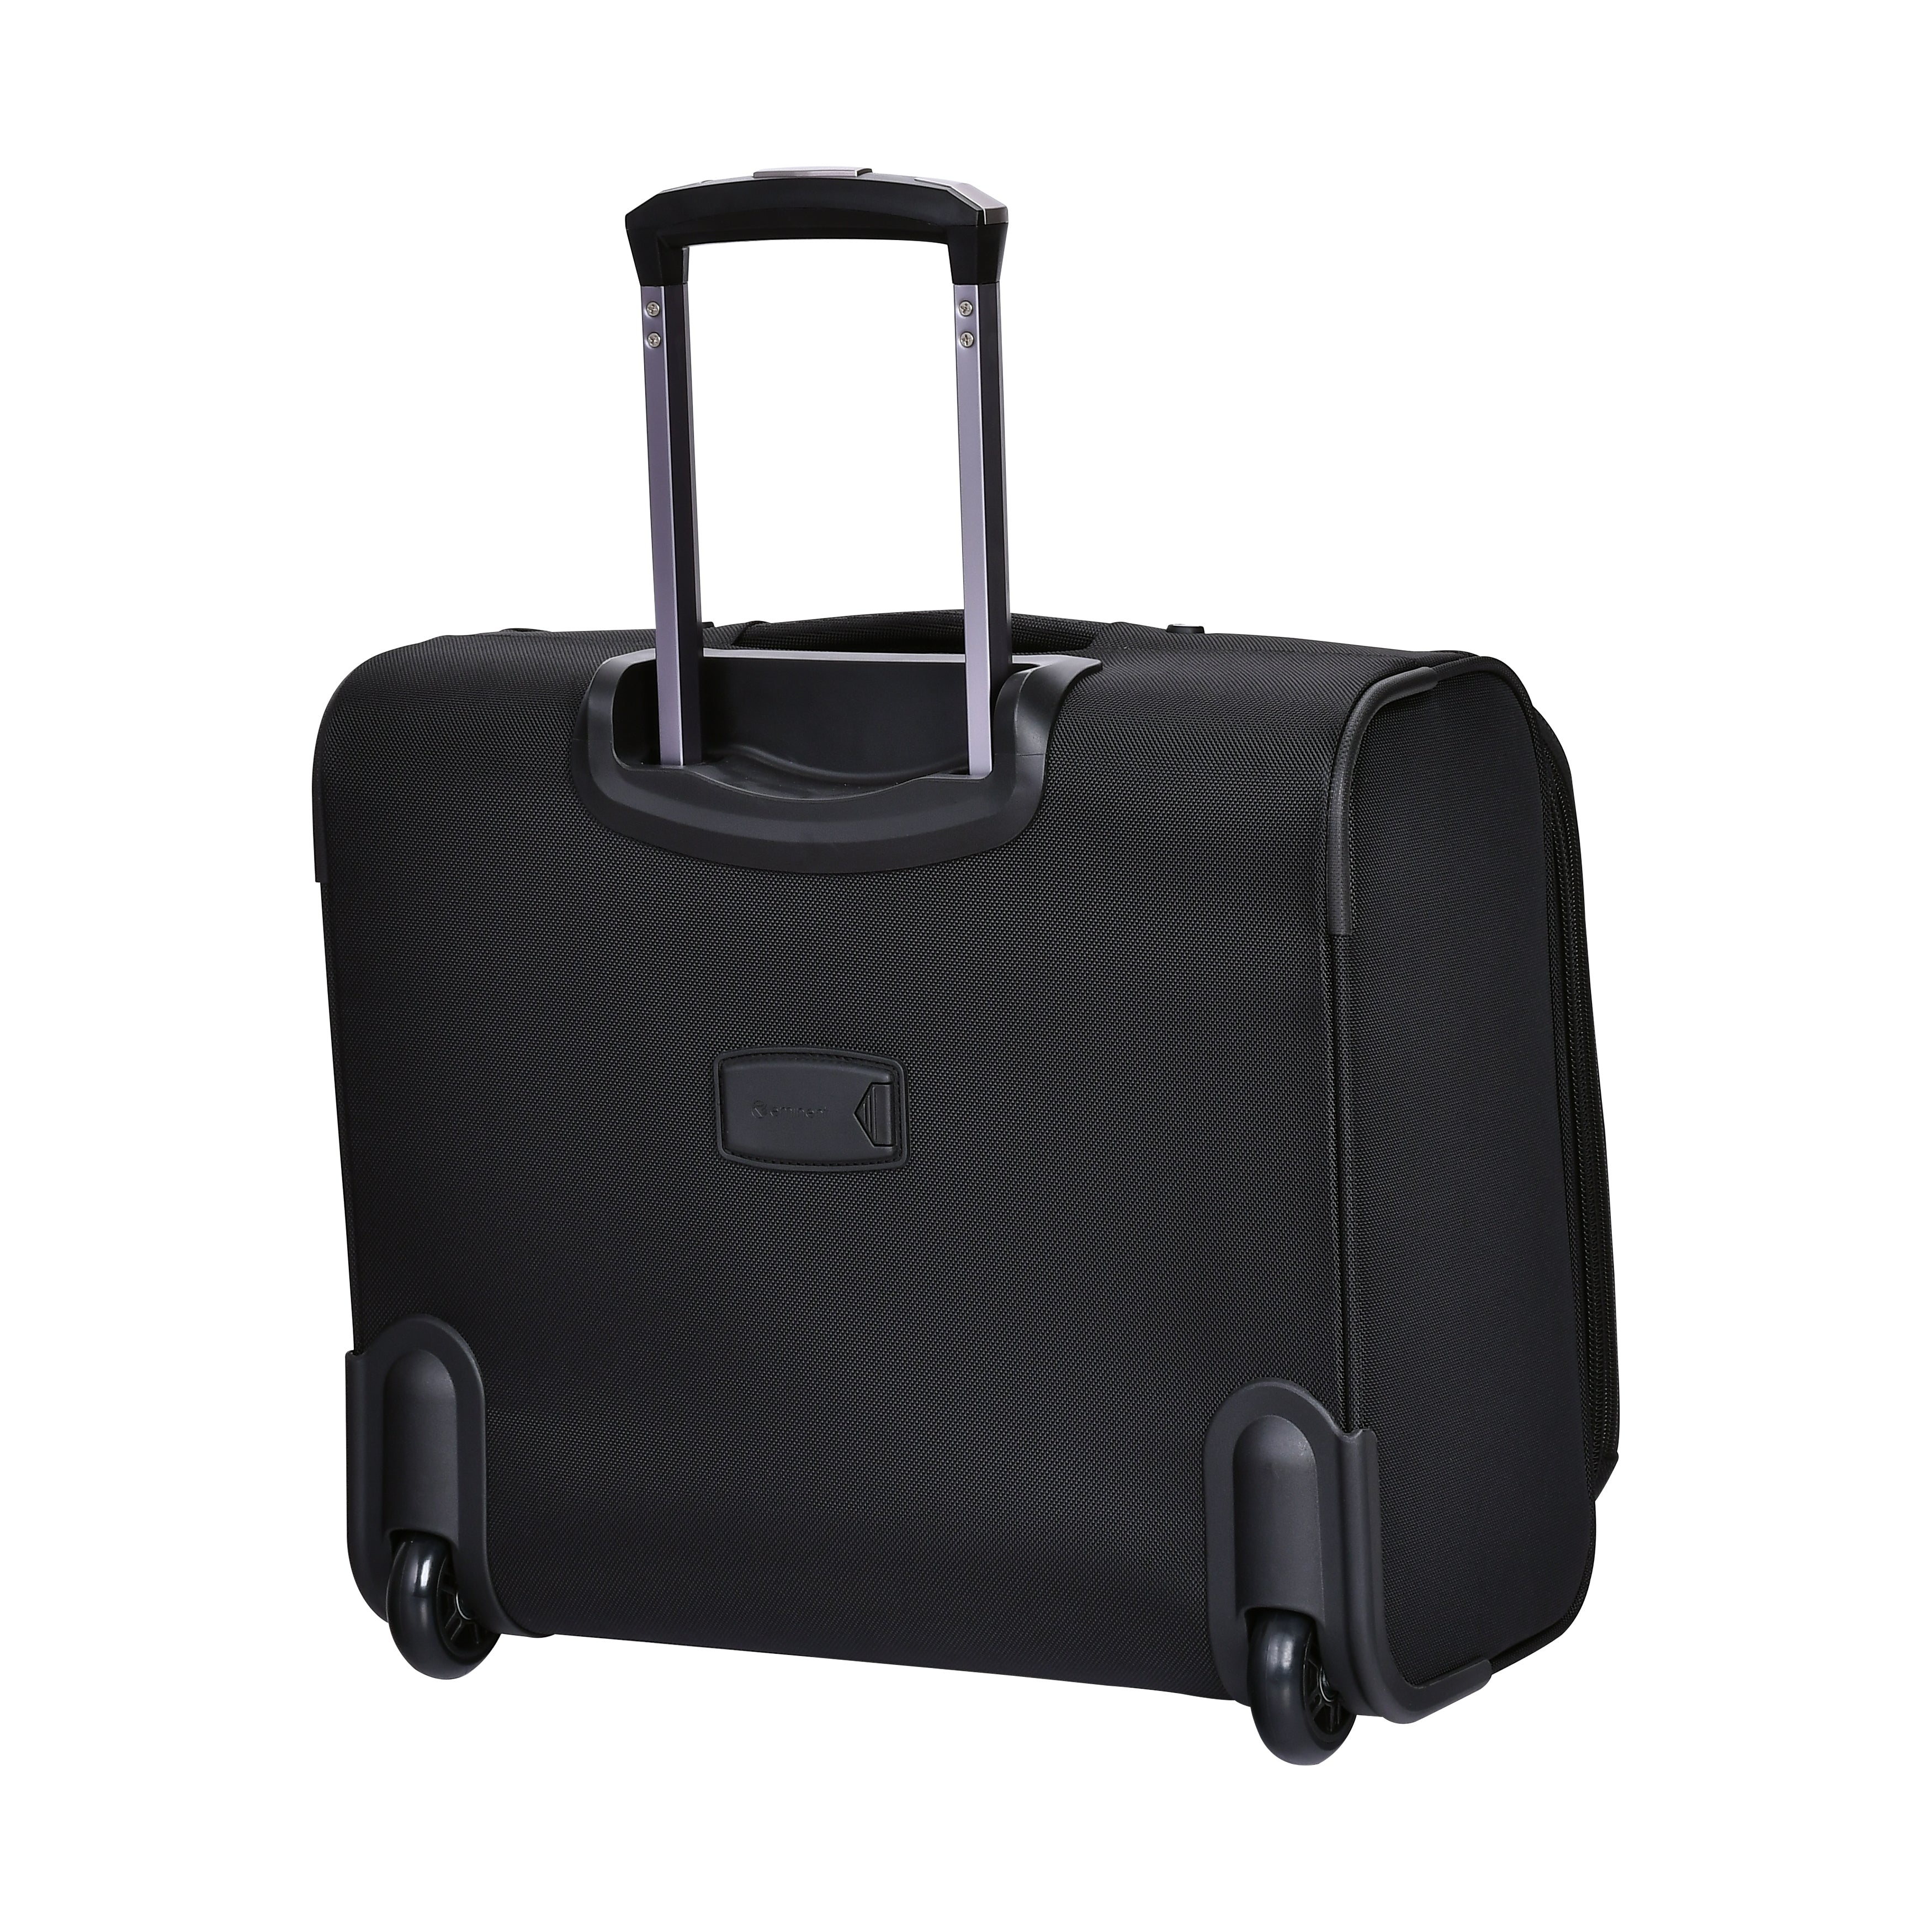 Eminent 17-inch 2 Wheeled Suitcase Premium Pilot case Trolley with Multi Compartments and RFID pockets, V324A-17